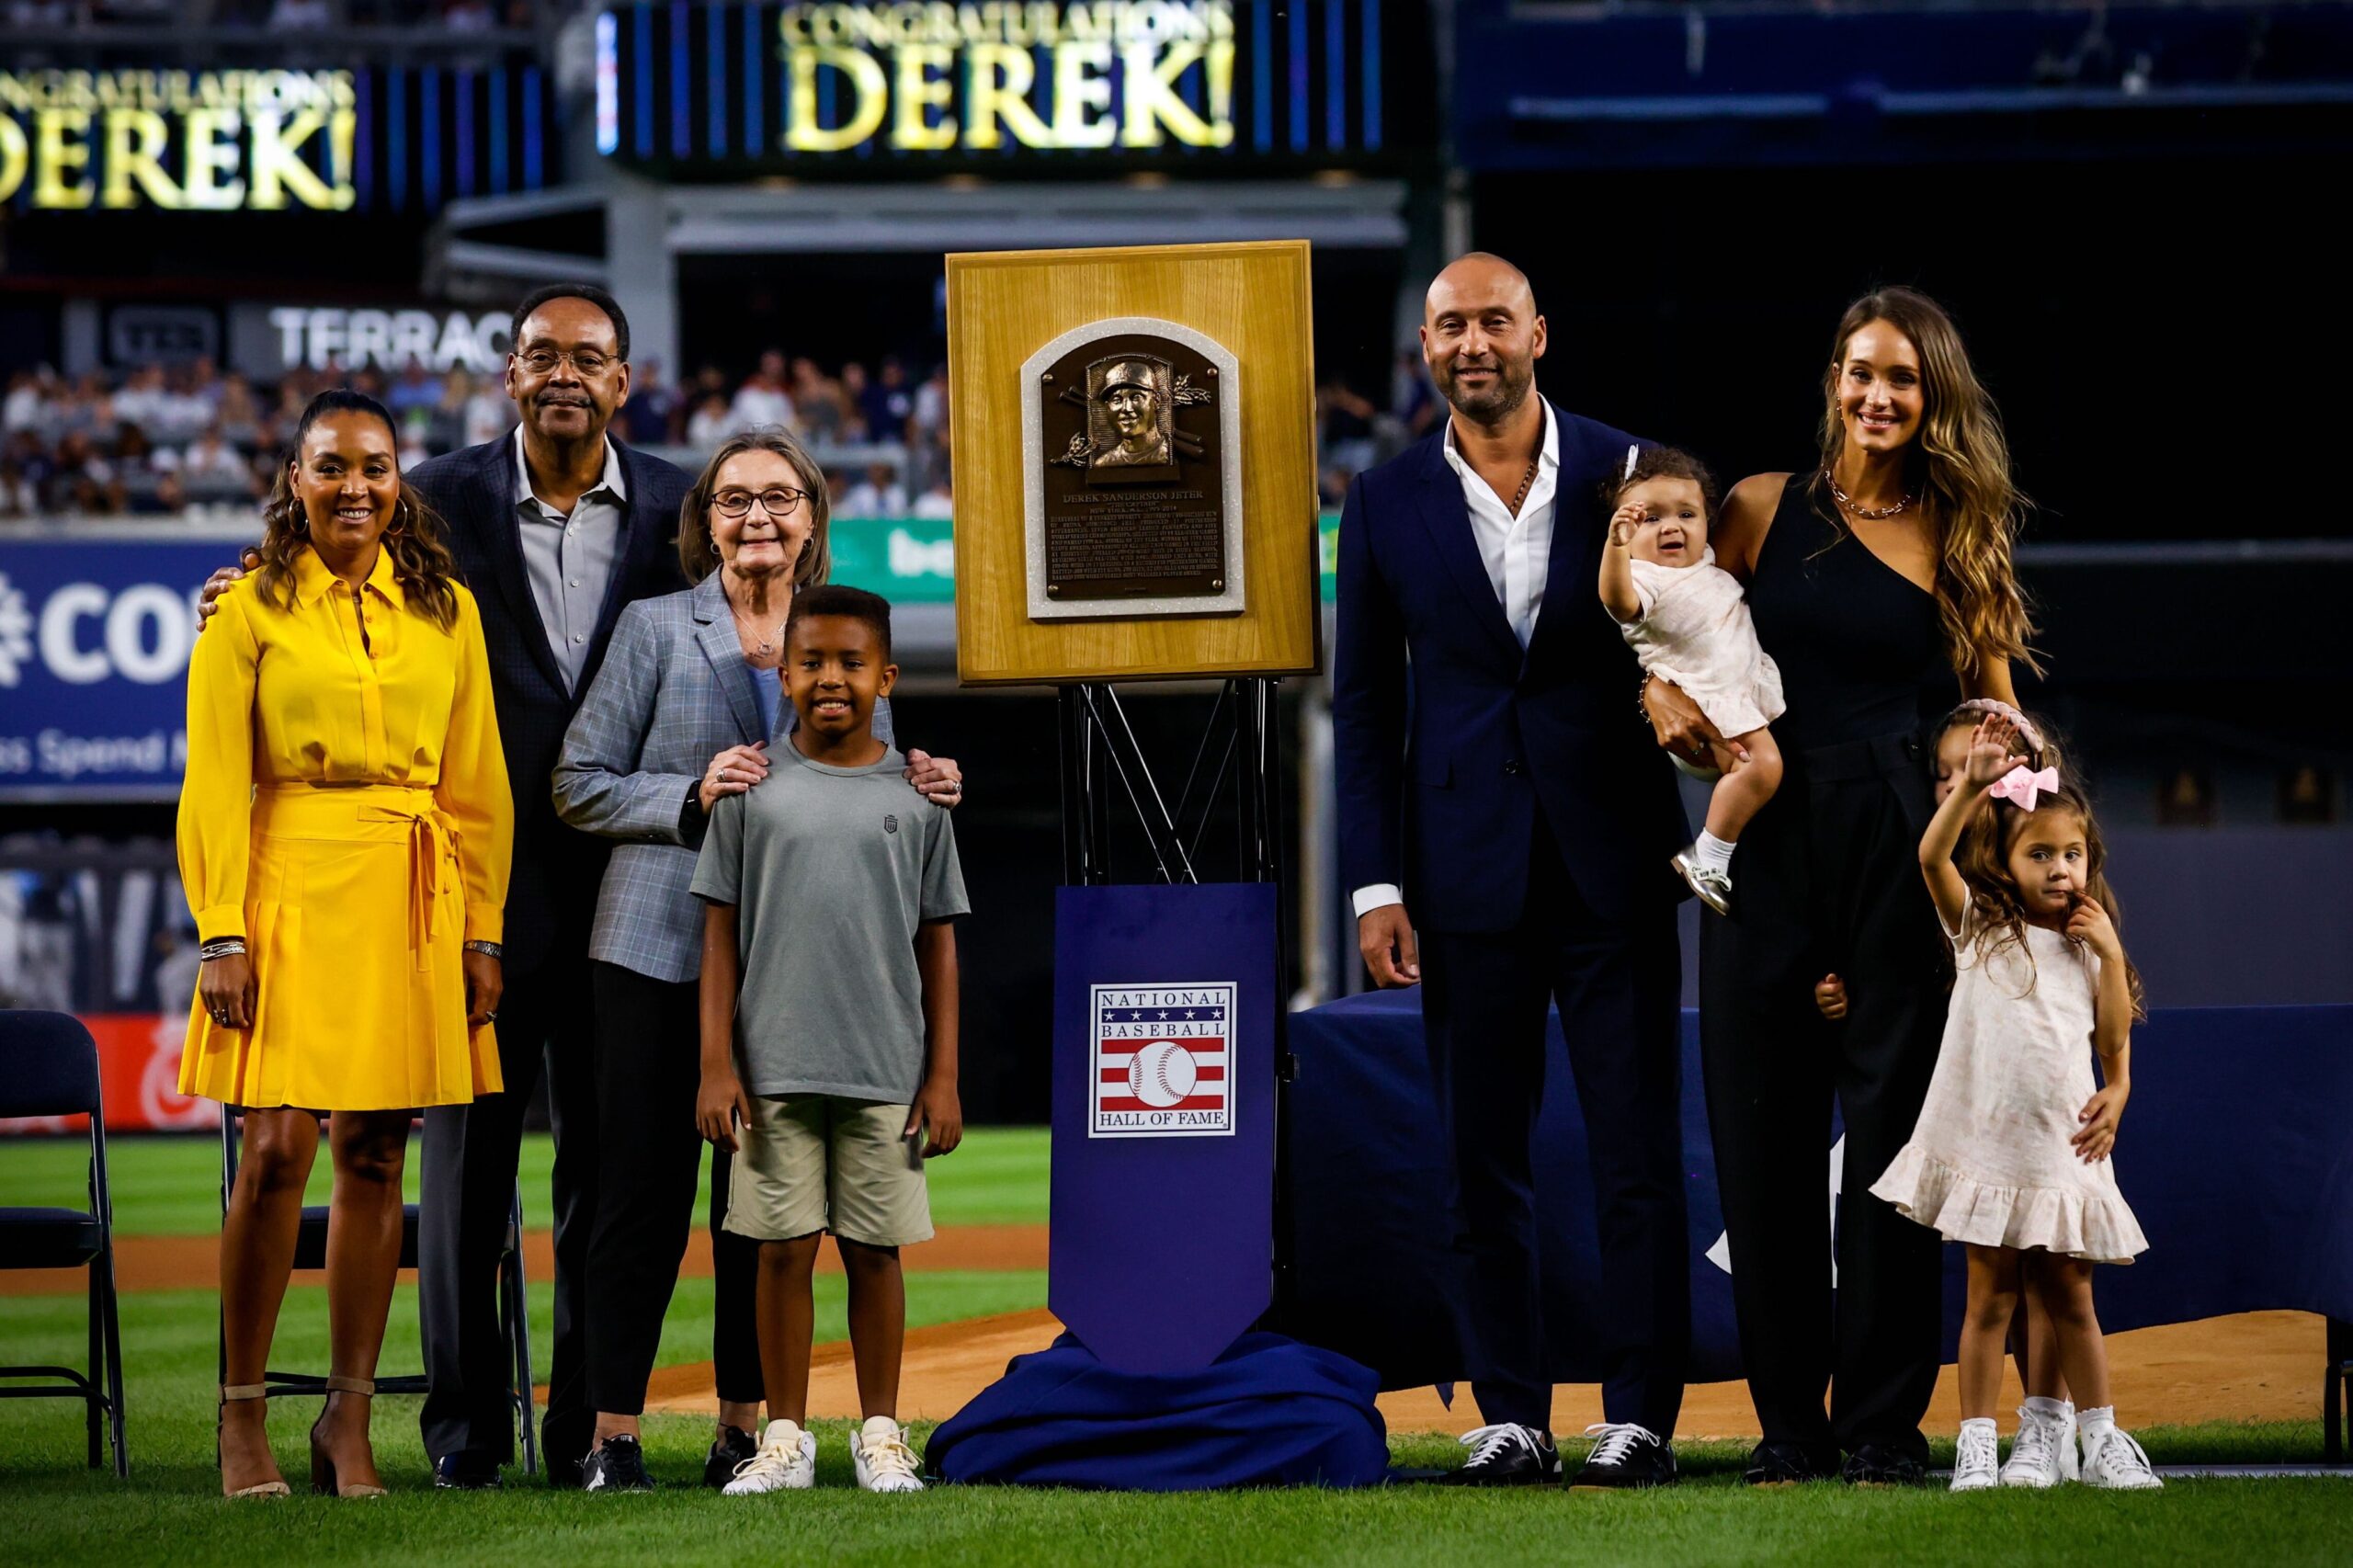 Derek Jeter's teammates, managers laud his Hall of Fame election